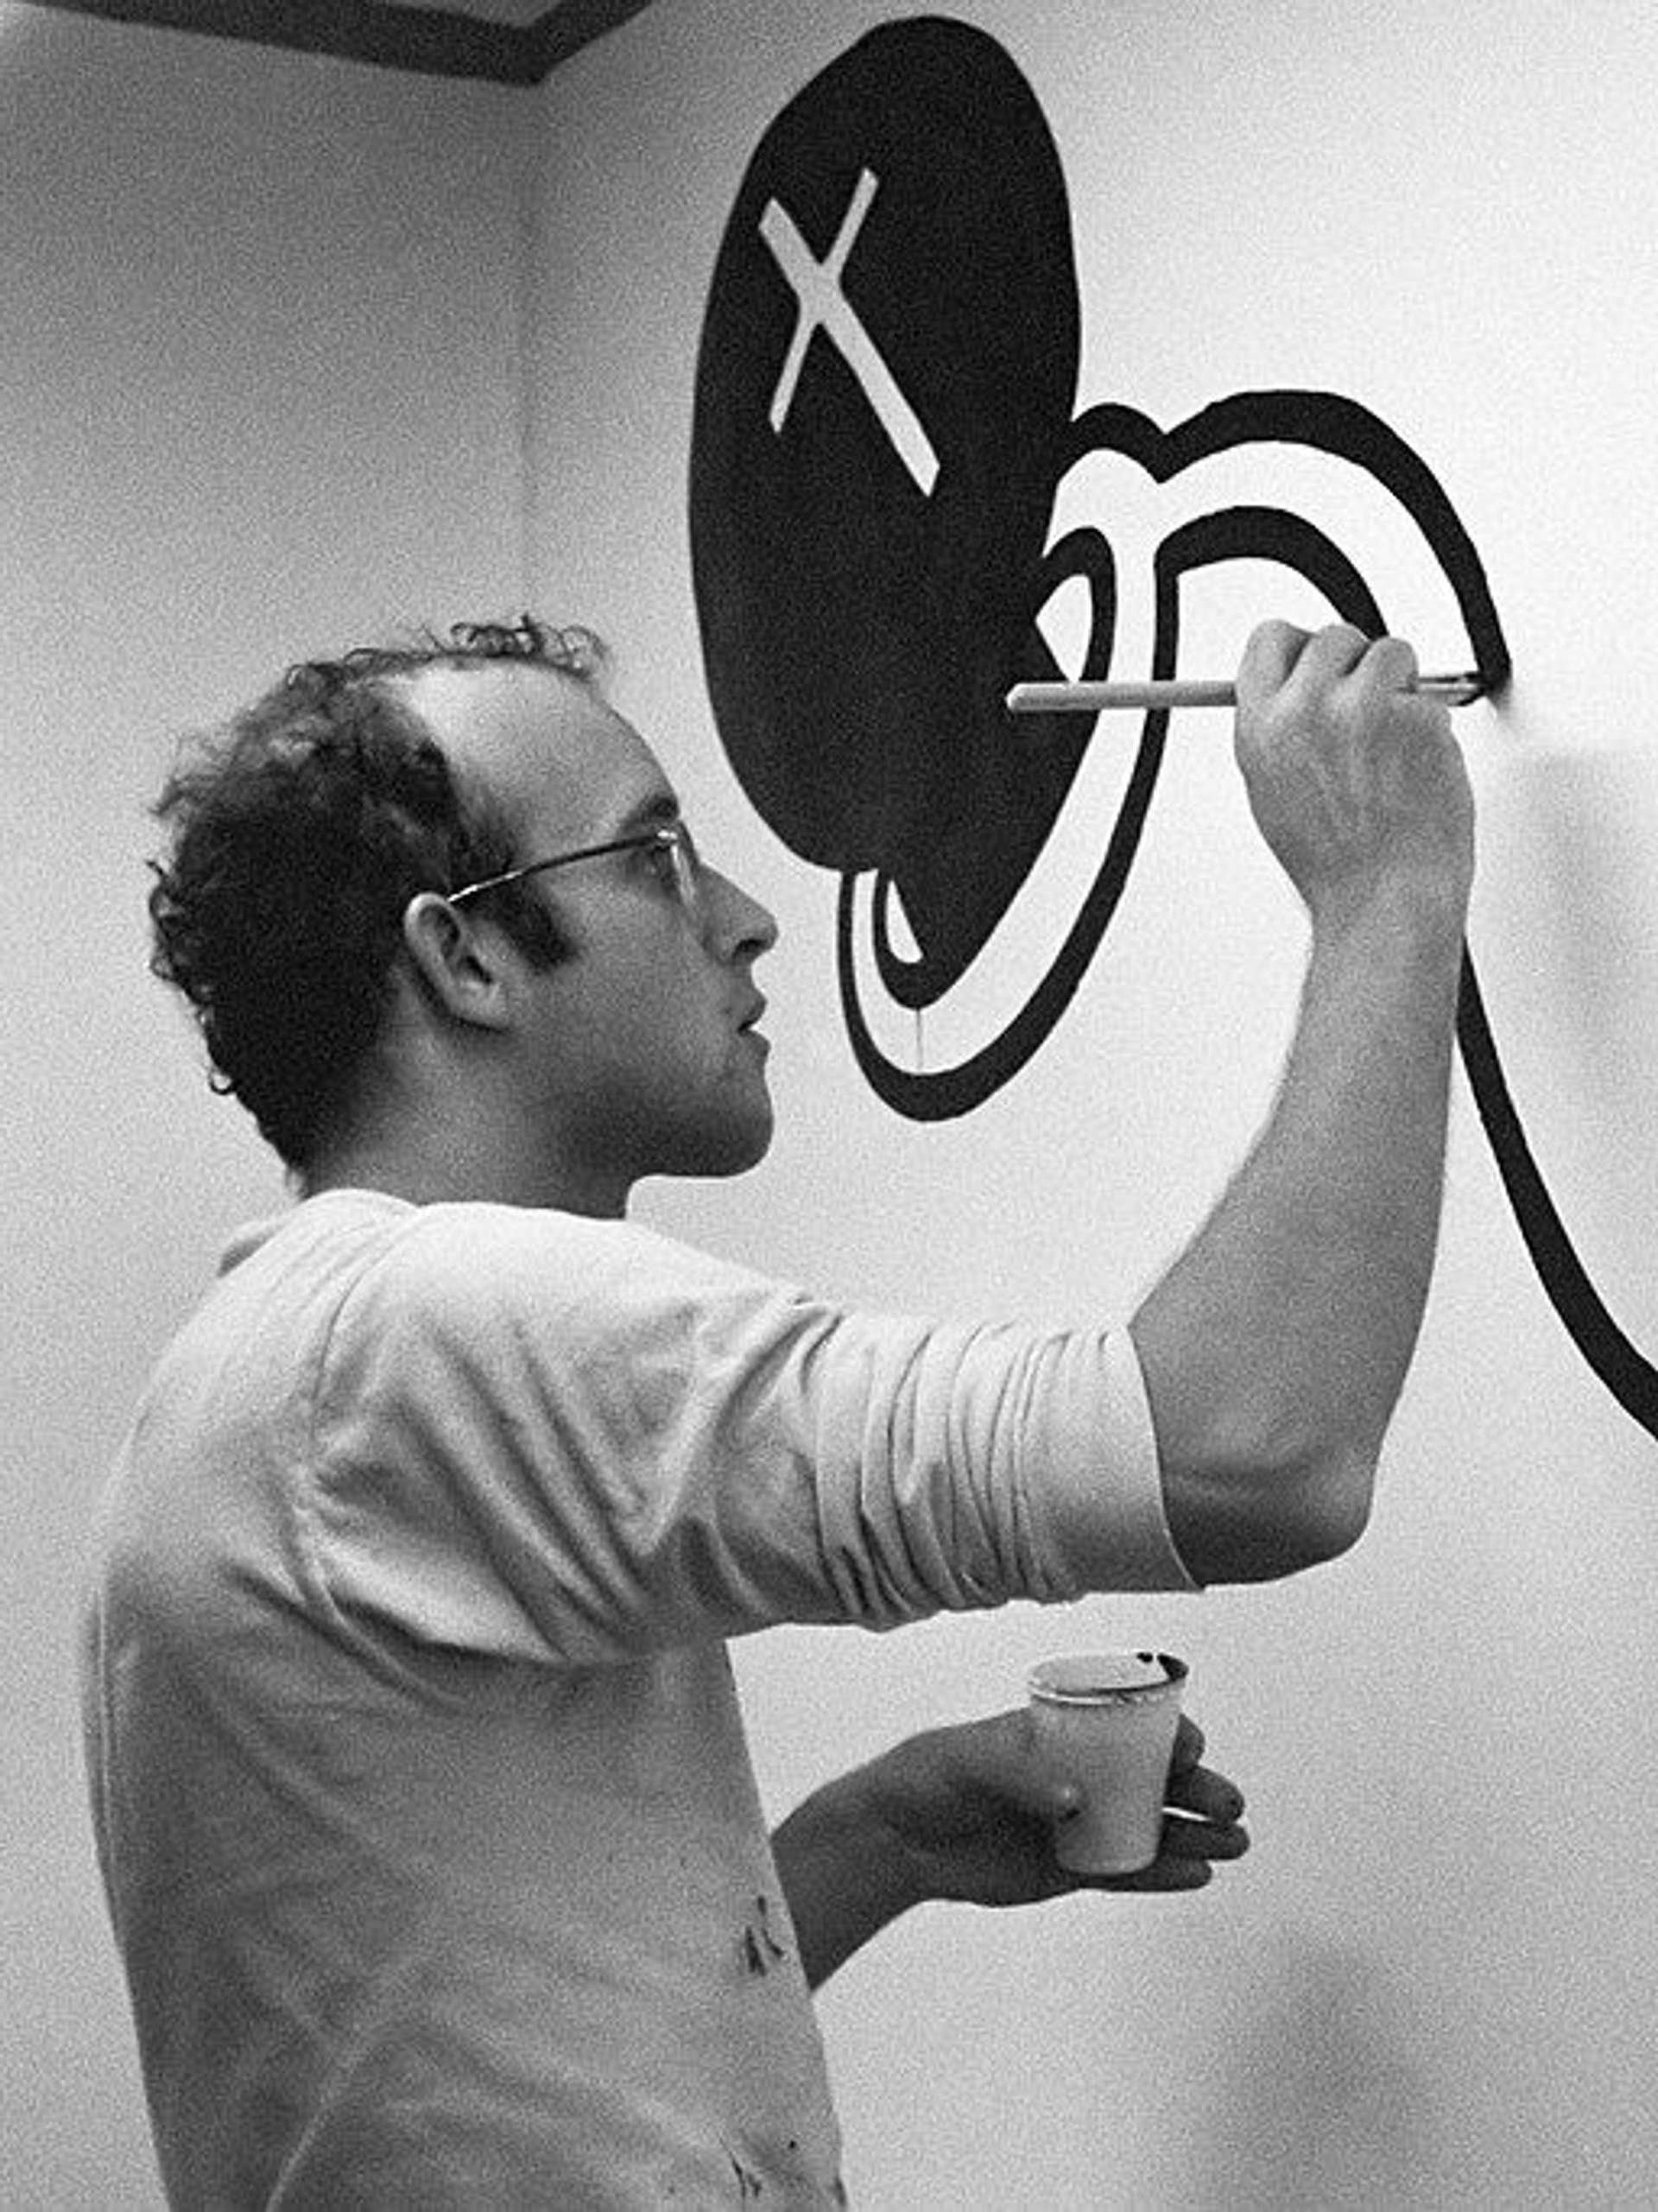 Keith Haring painting line art onto a wall.